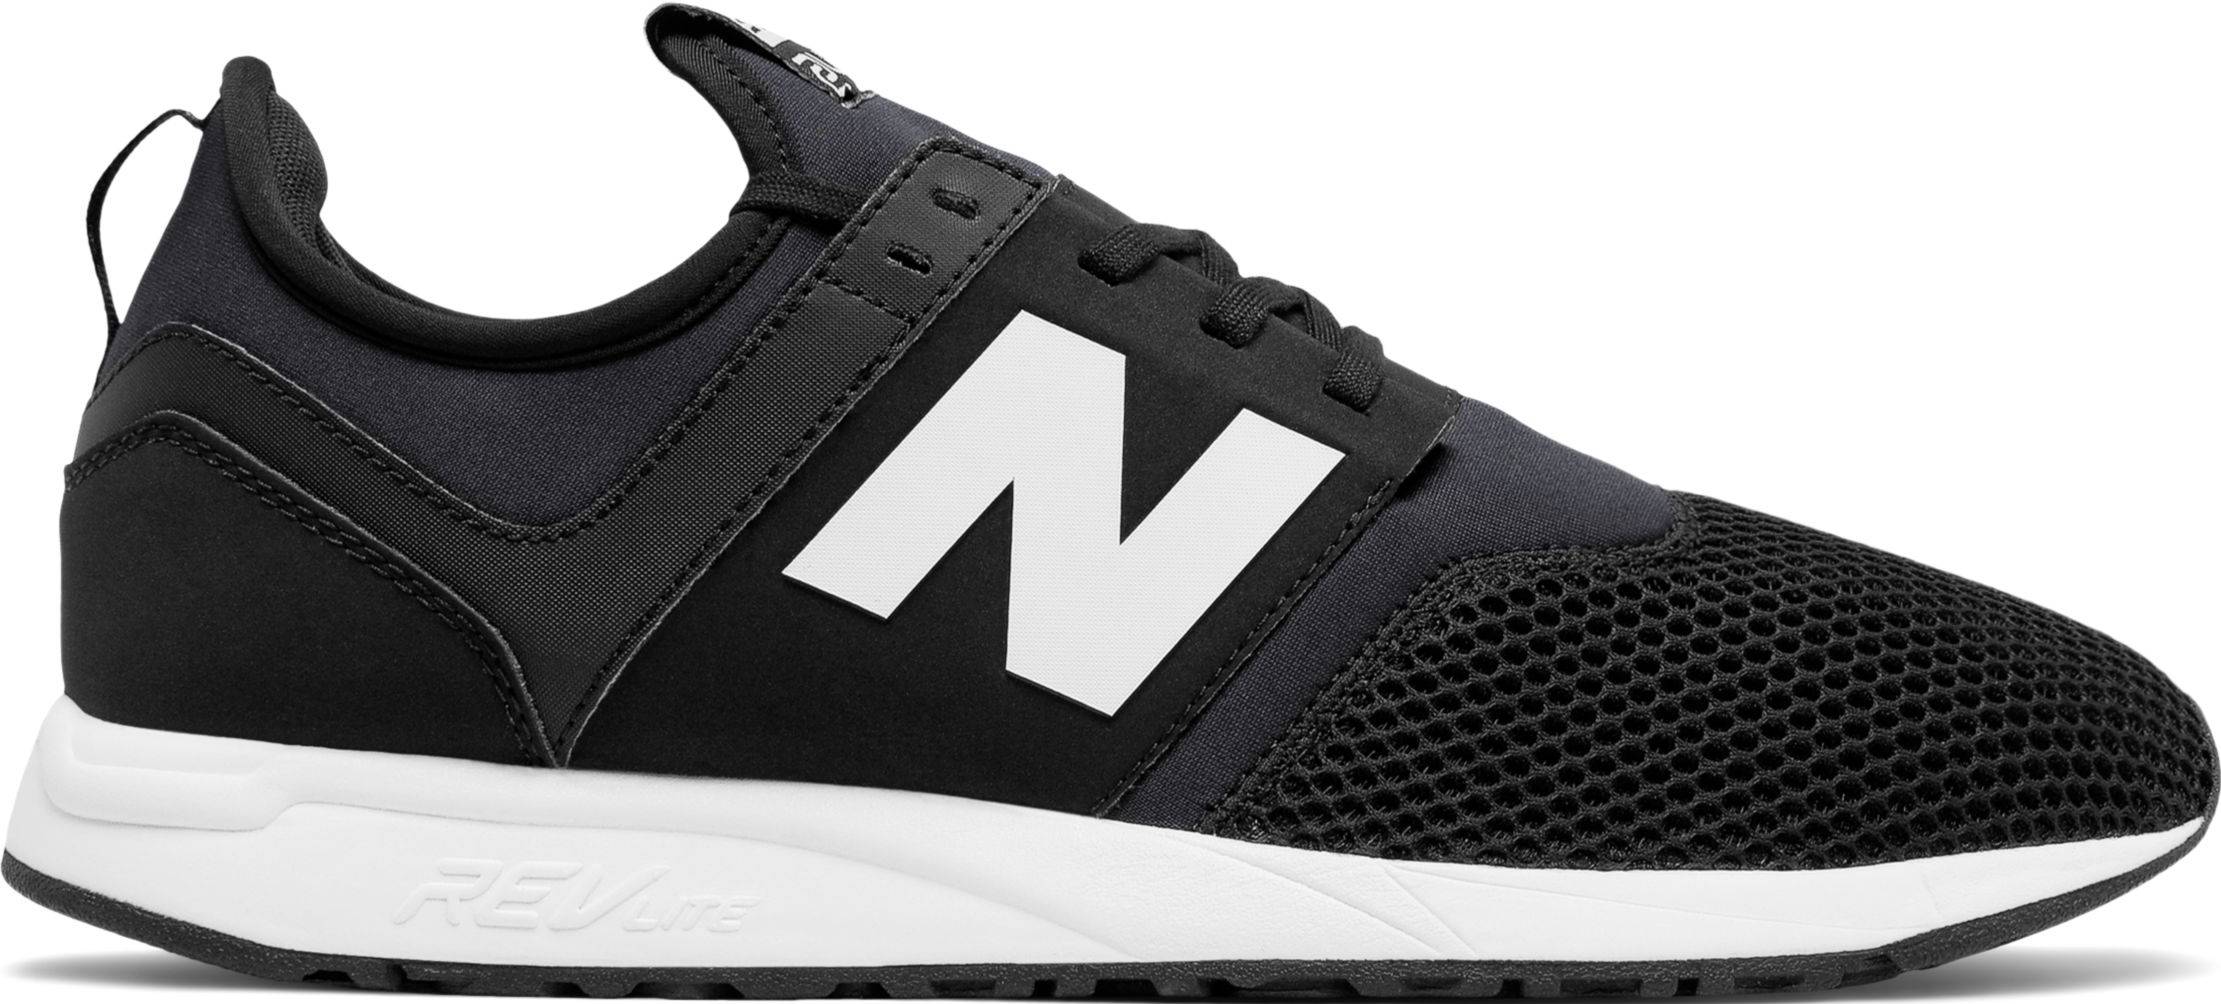 overlook Search engine marketing controller new balance 247 luxe ...